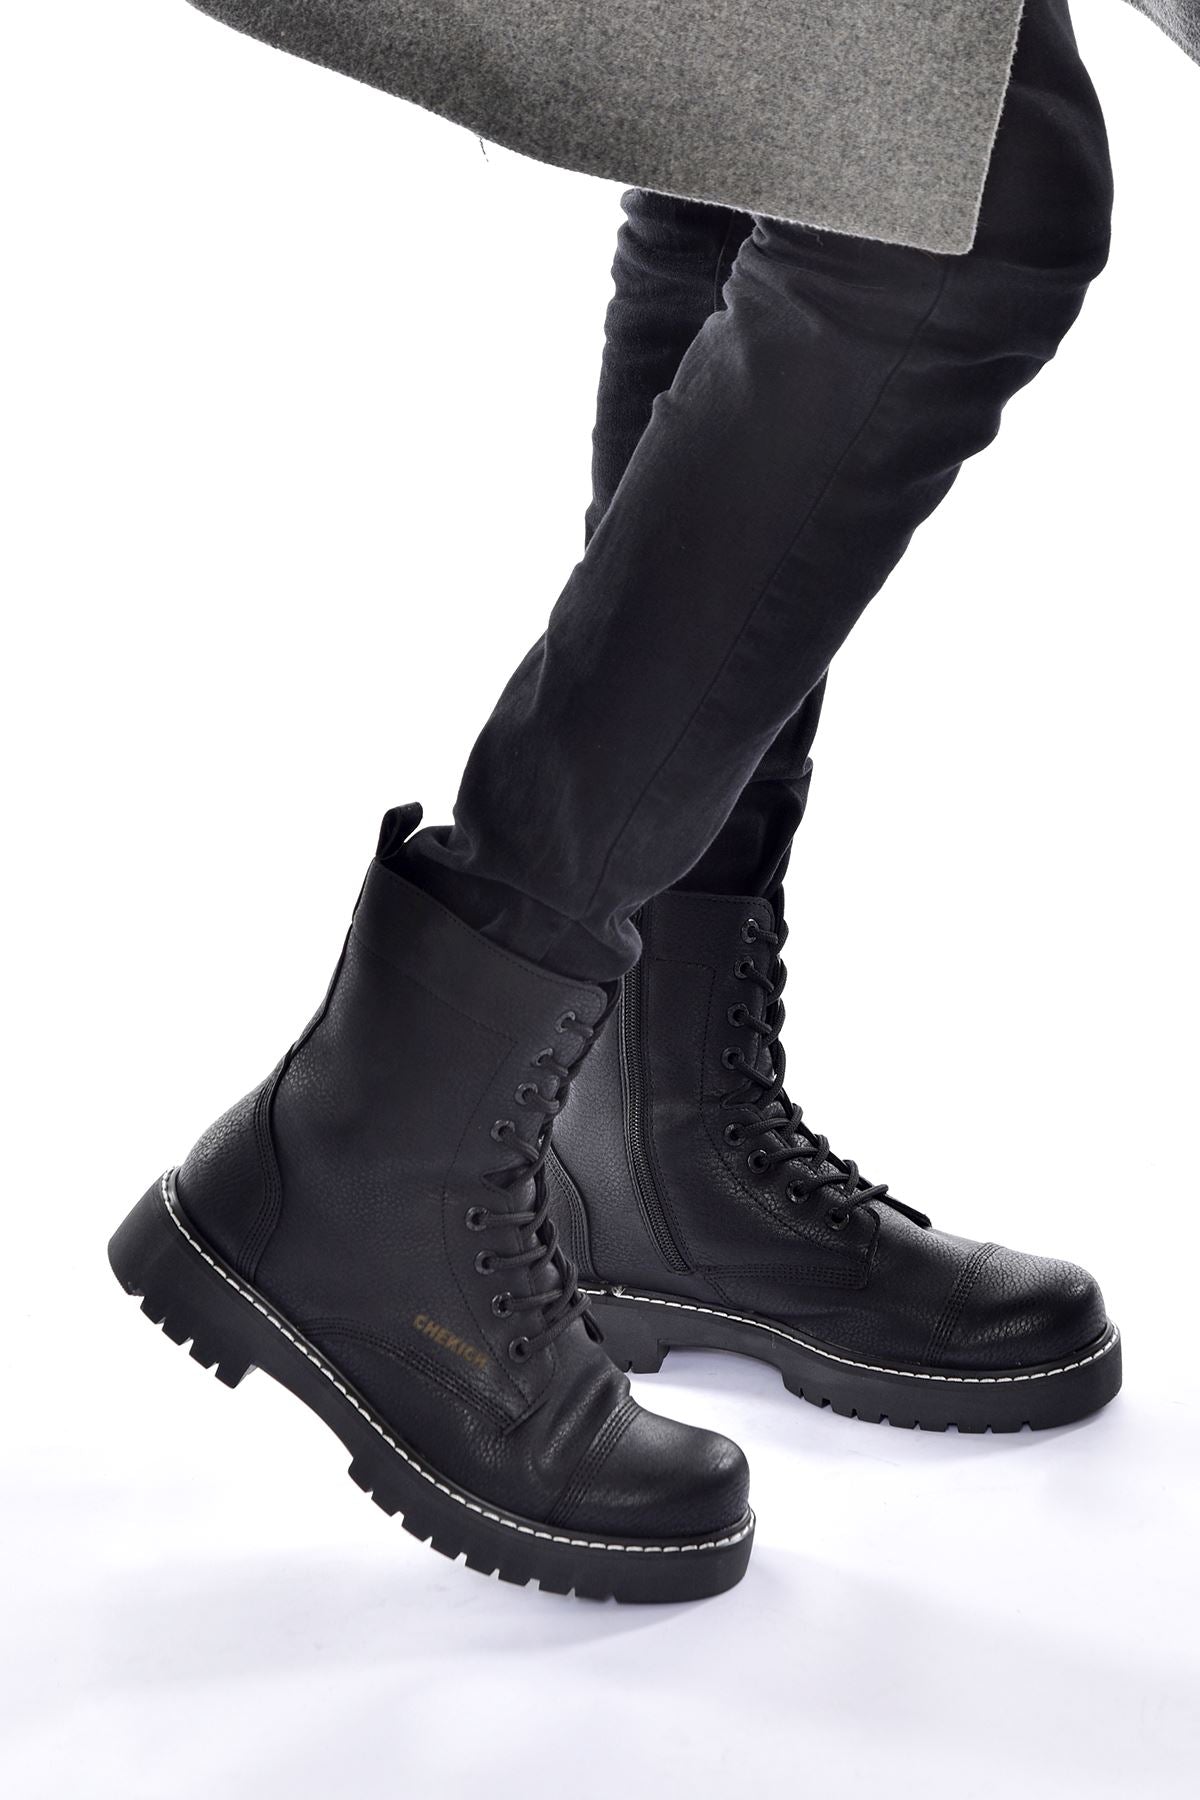 CH009 Men's Leather Black-Black Sole Casual Winter Boots - STREETMODE ™